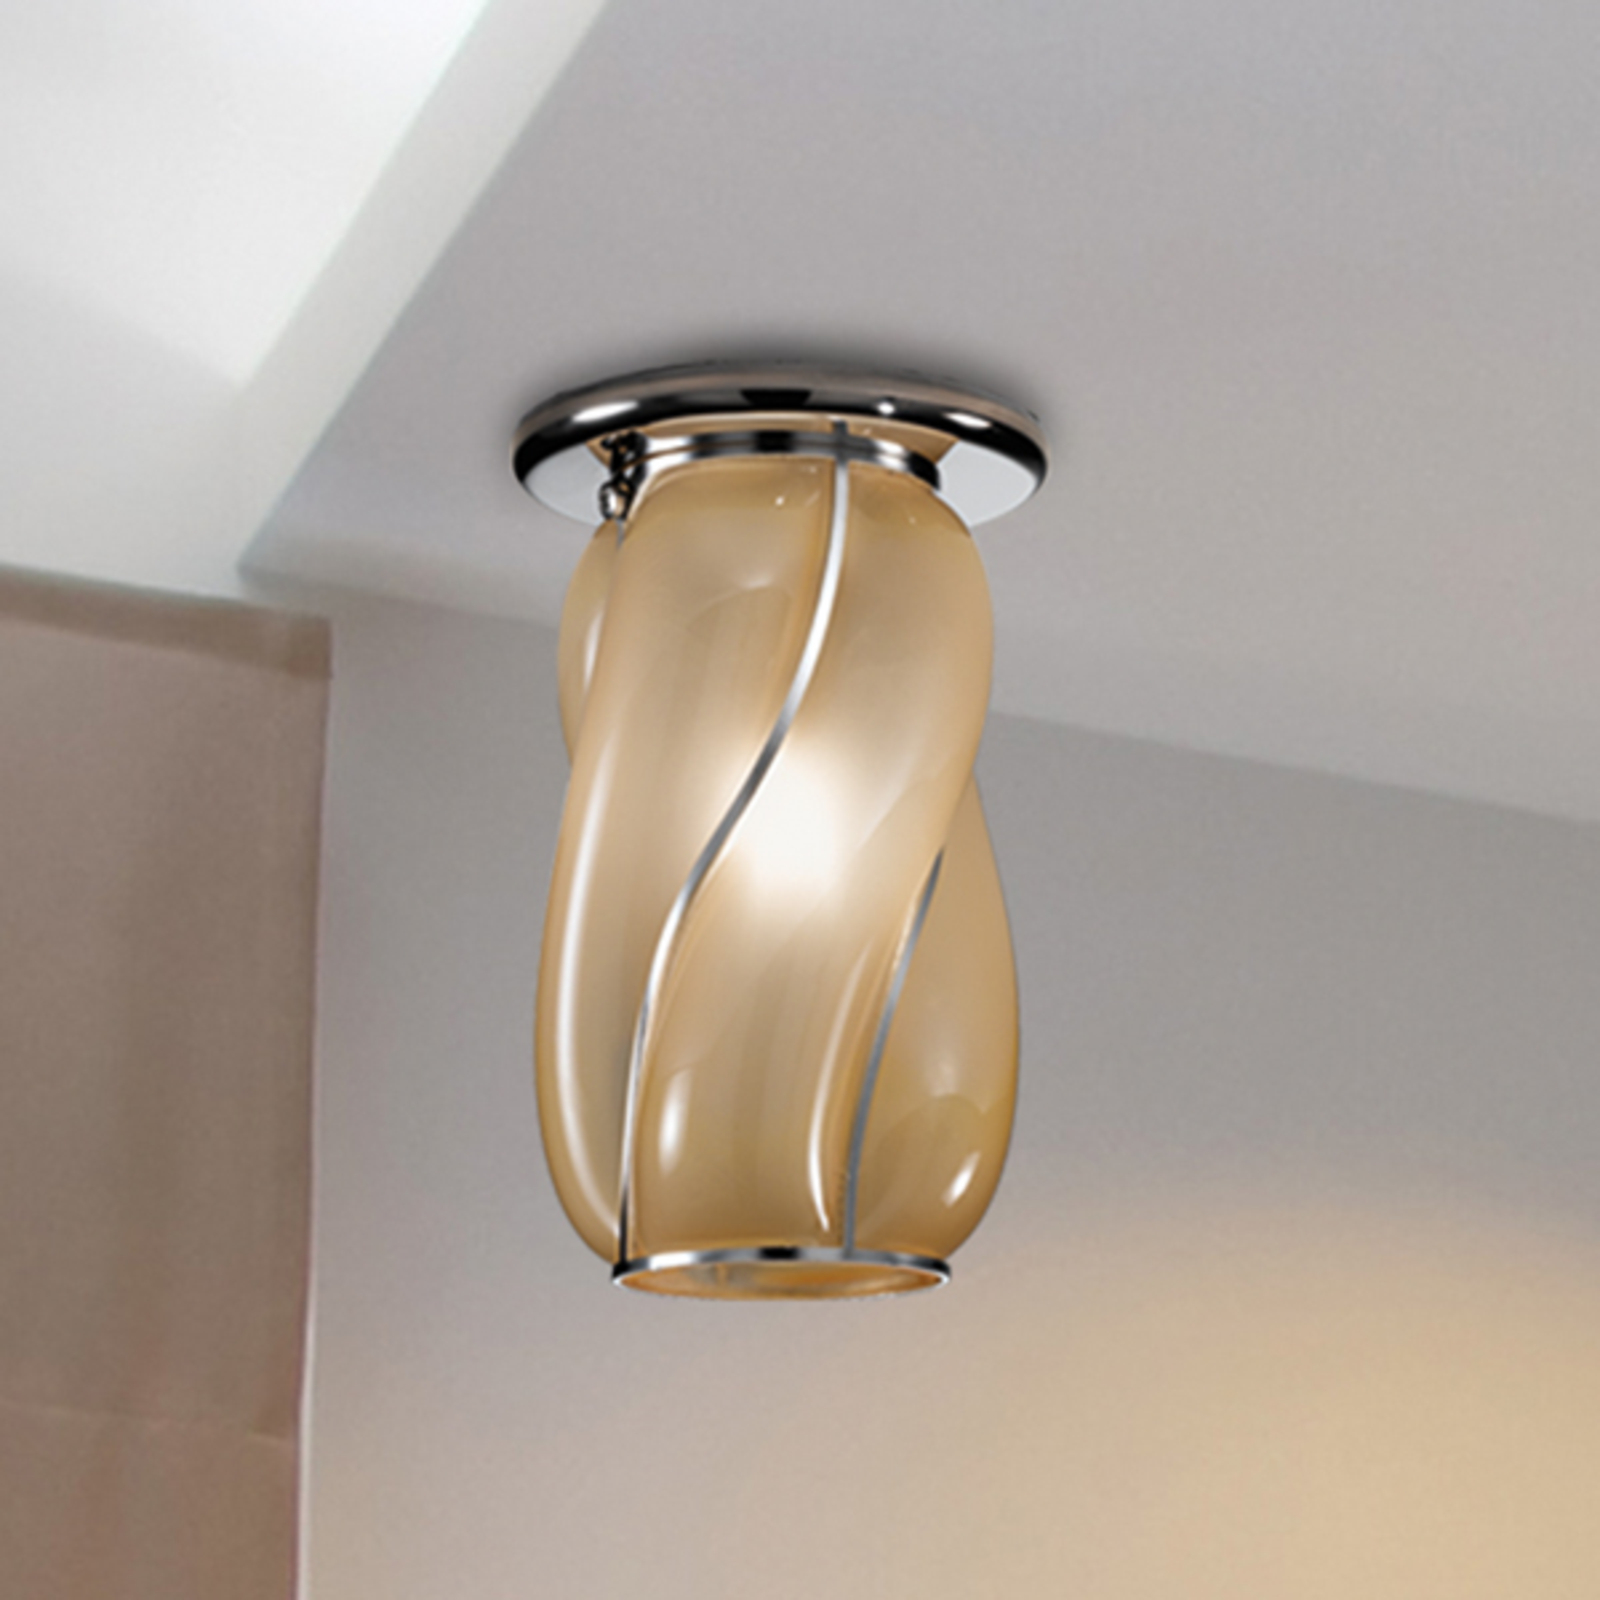 Amber-coloured Orione ceiling light, striped